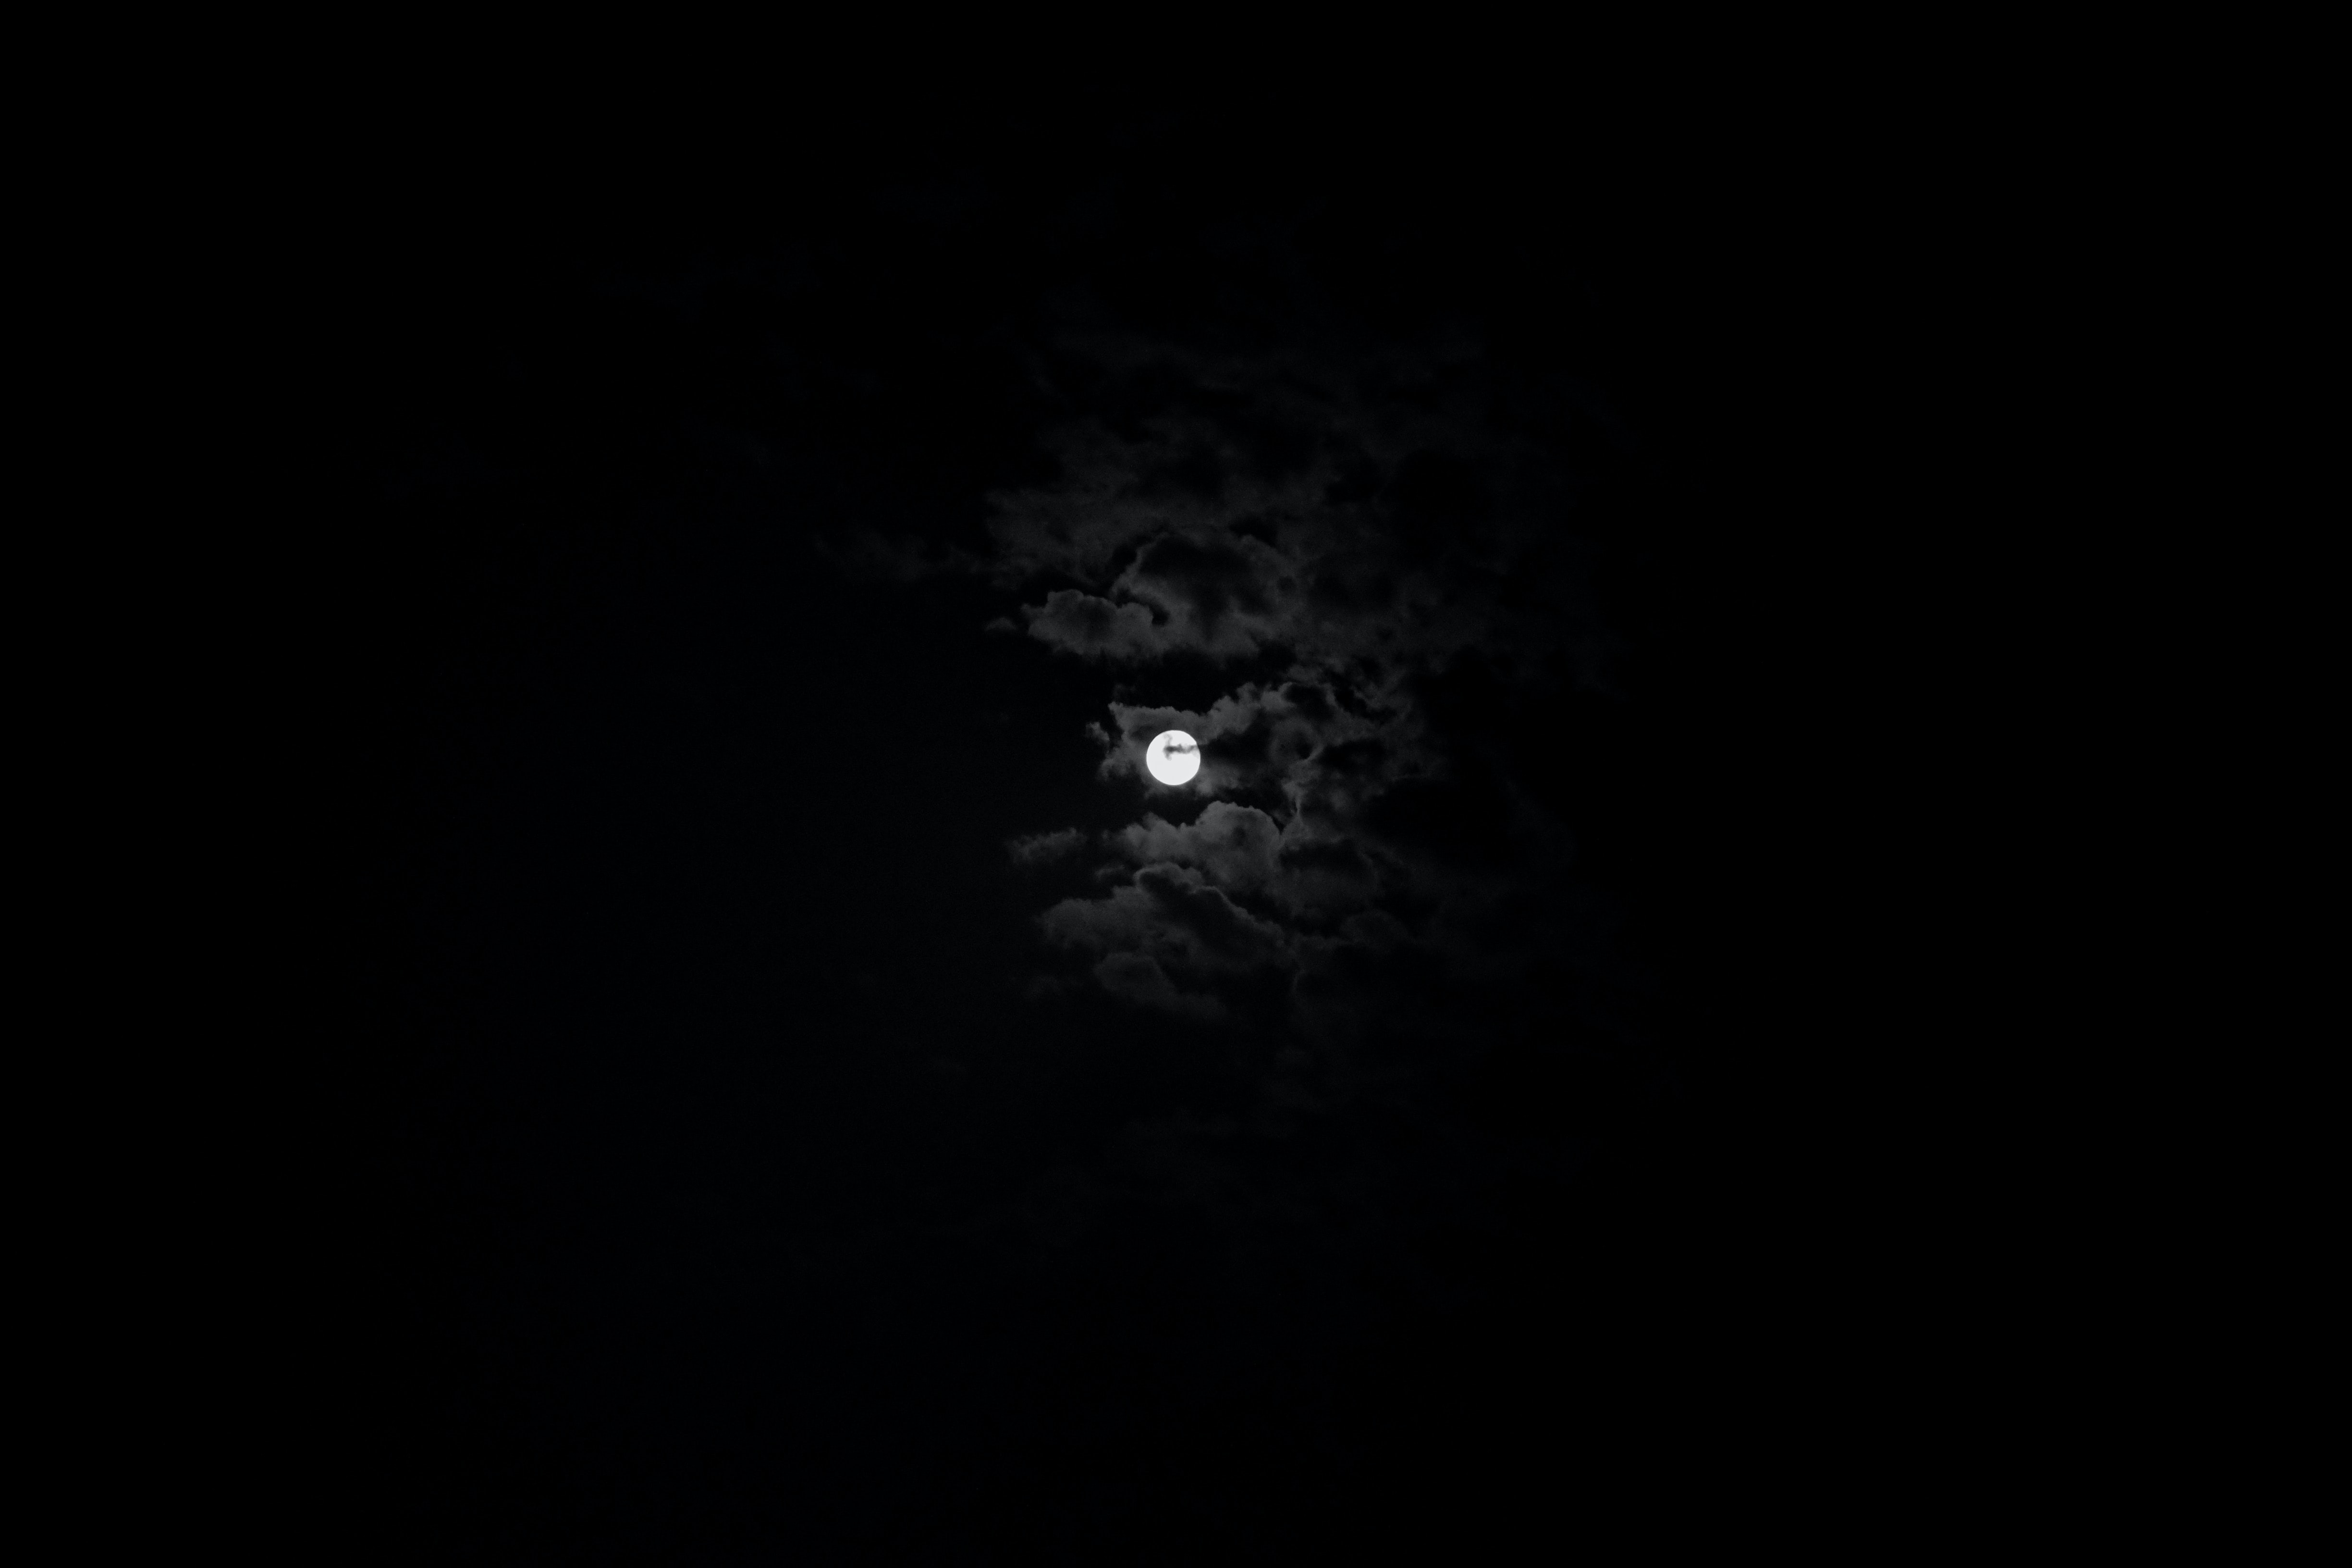 moon, black, black and white, sky, night, clouds Full HD